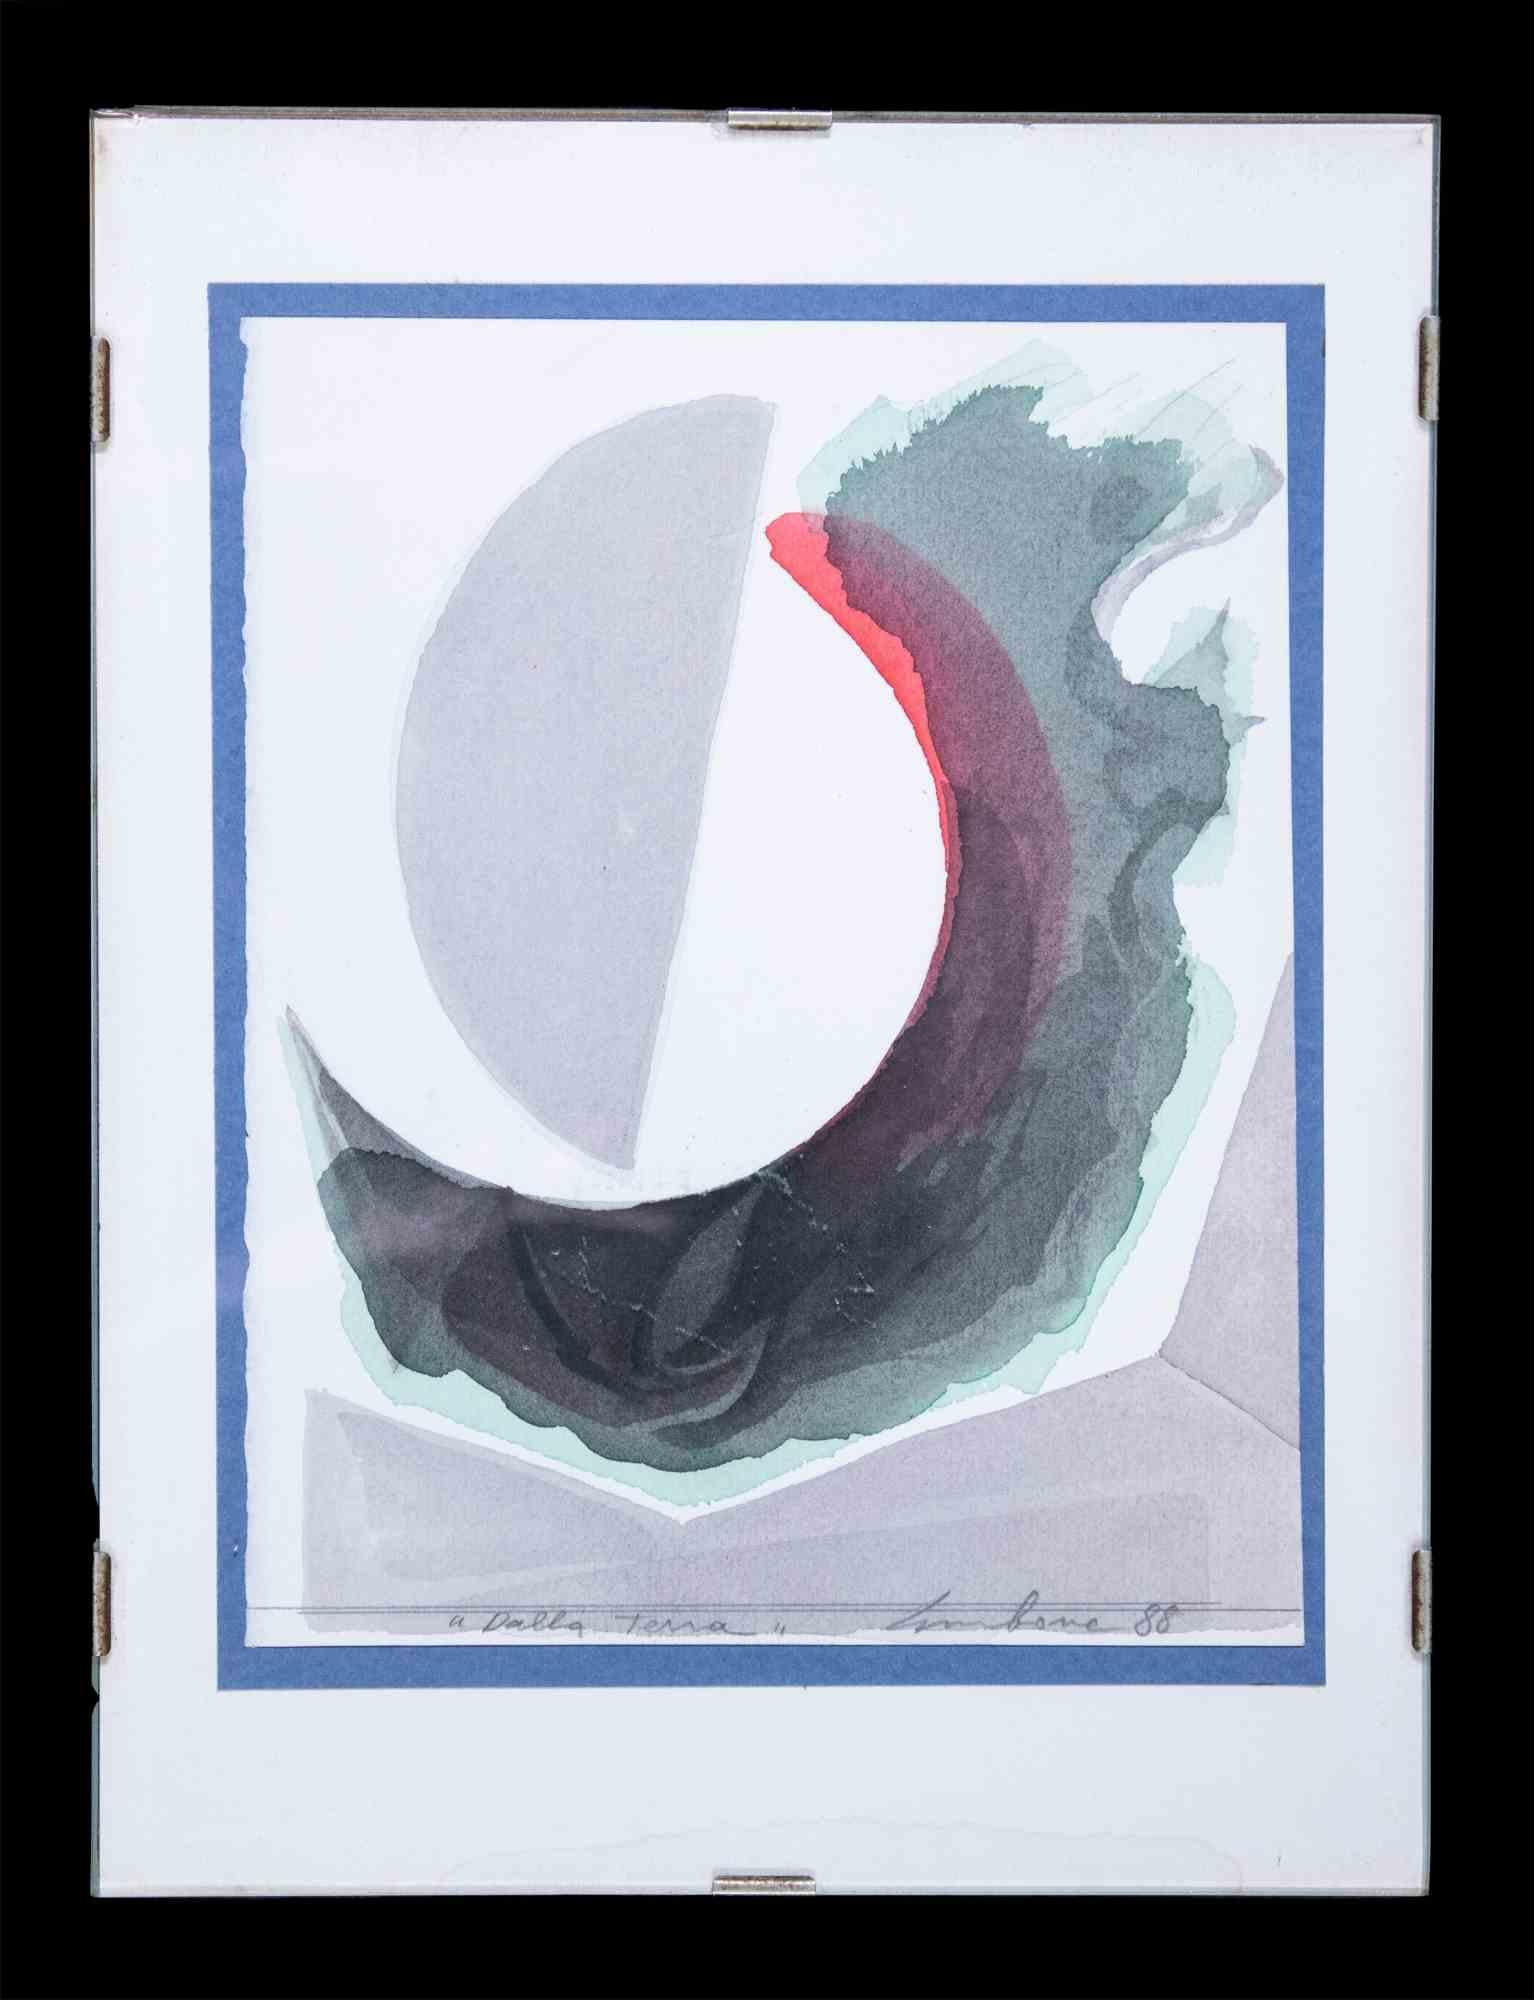 From Earth is an original  contemporary artwork realized in 1988  by Mario Surbone.

Colored watercolor on paper.

Hand signed and dated by the artist on the lower  margin.

Fair conditions (yellowing of paper and some stains).

Includes frame: 24.5